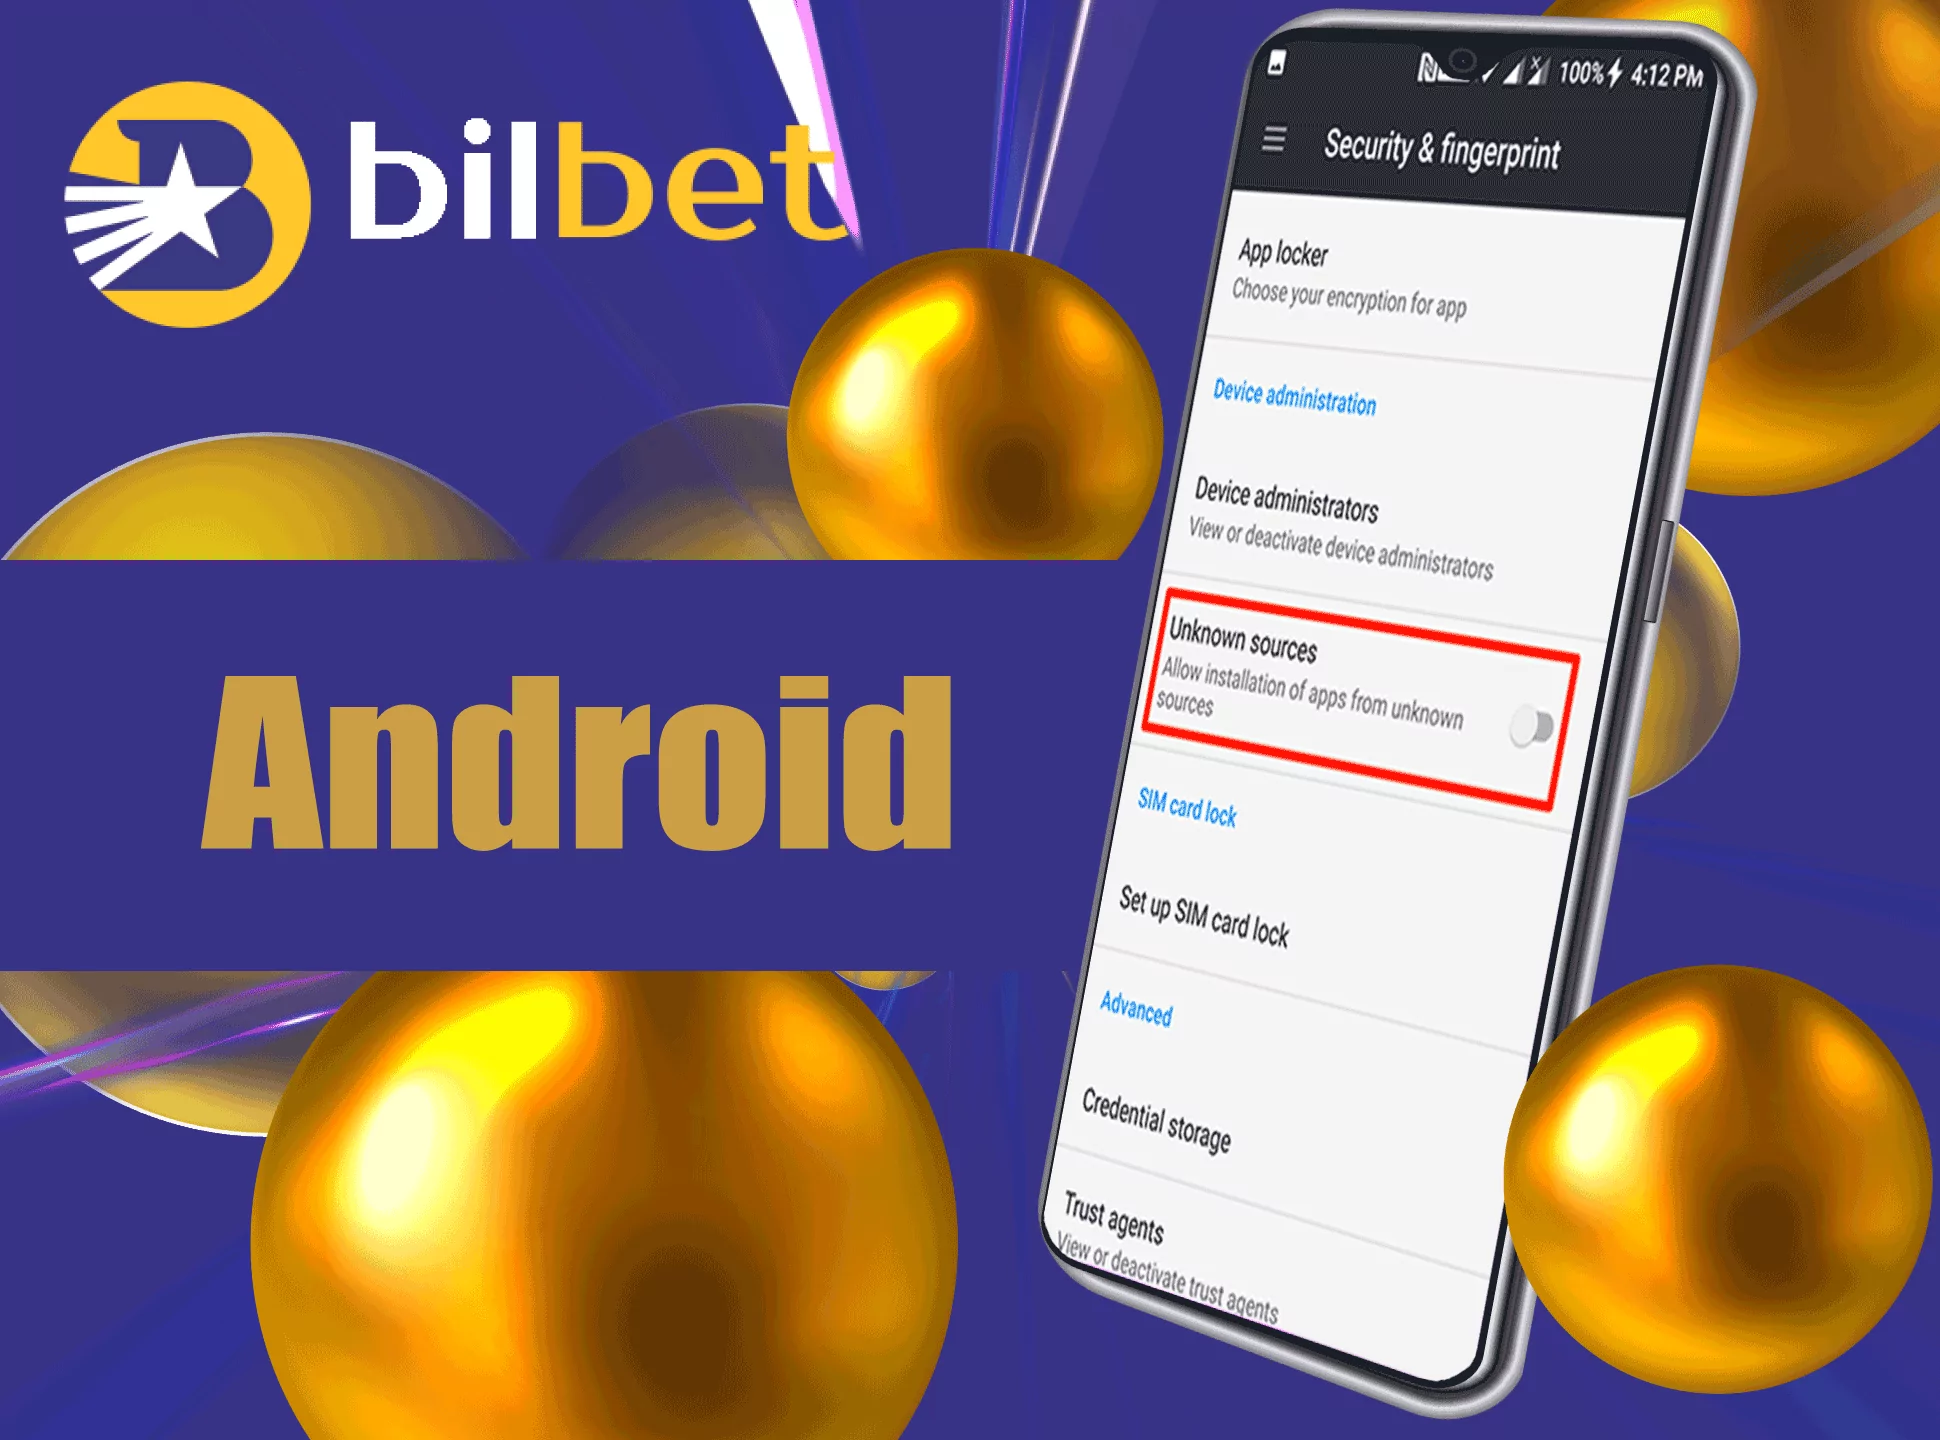 Change the settings of your smartphone and download Bilbet Apk file.